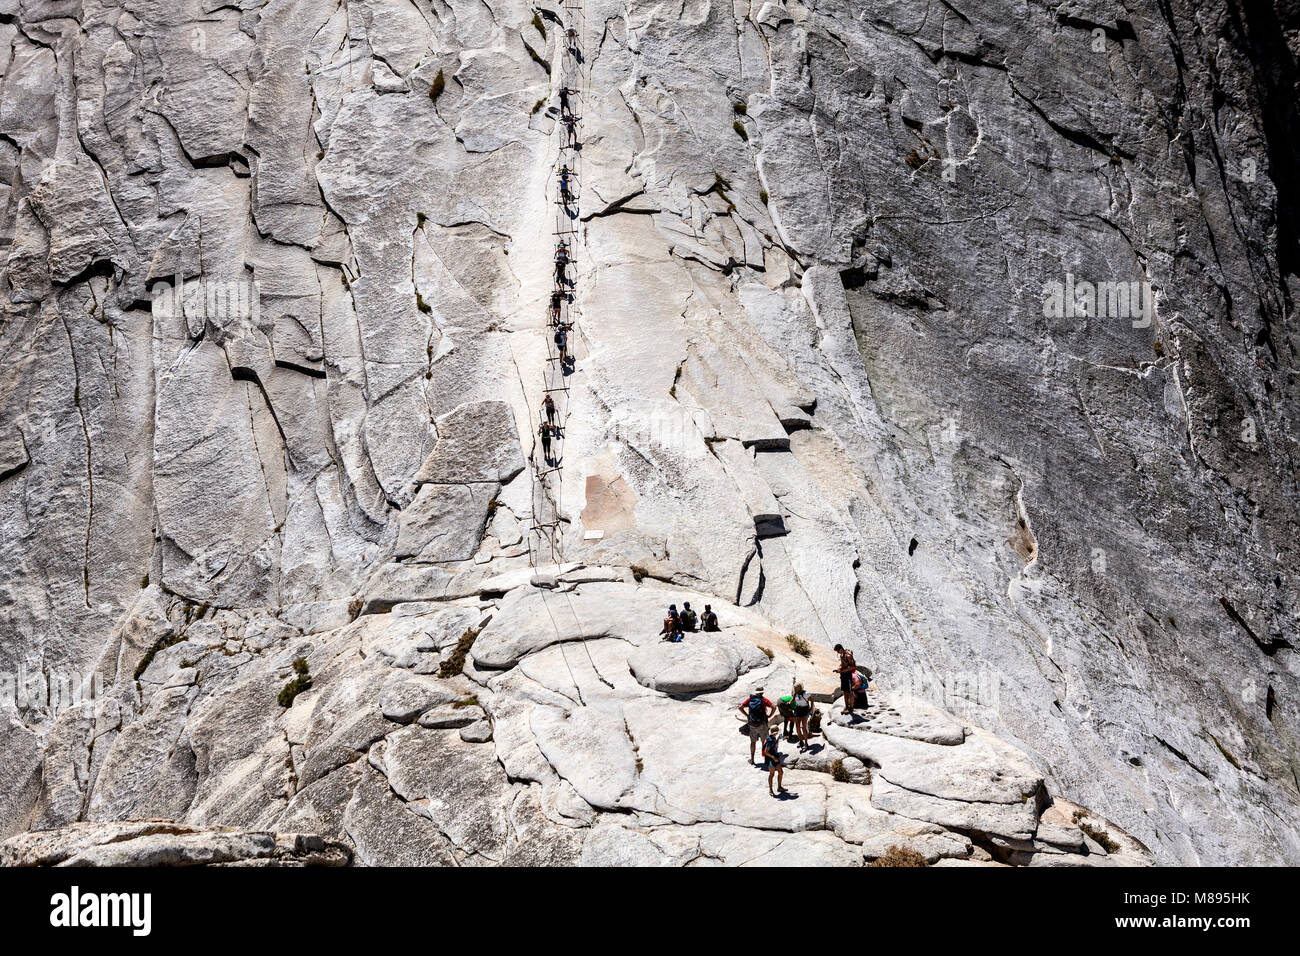 CA02892-00...CALIFORNIA - The cable route up Half Dome in Yosemite National Park. Stock Photo